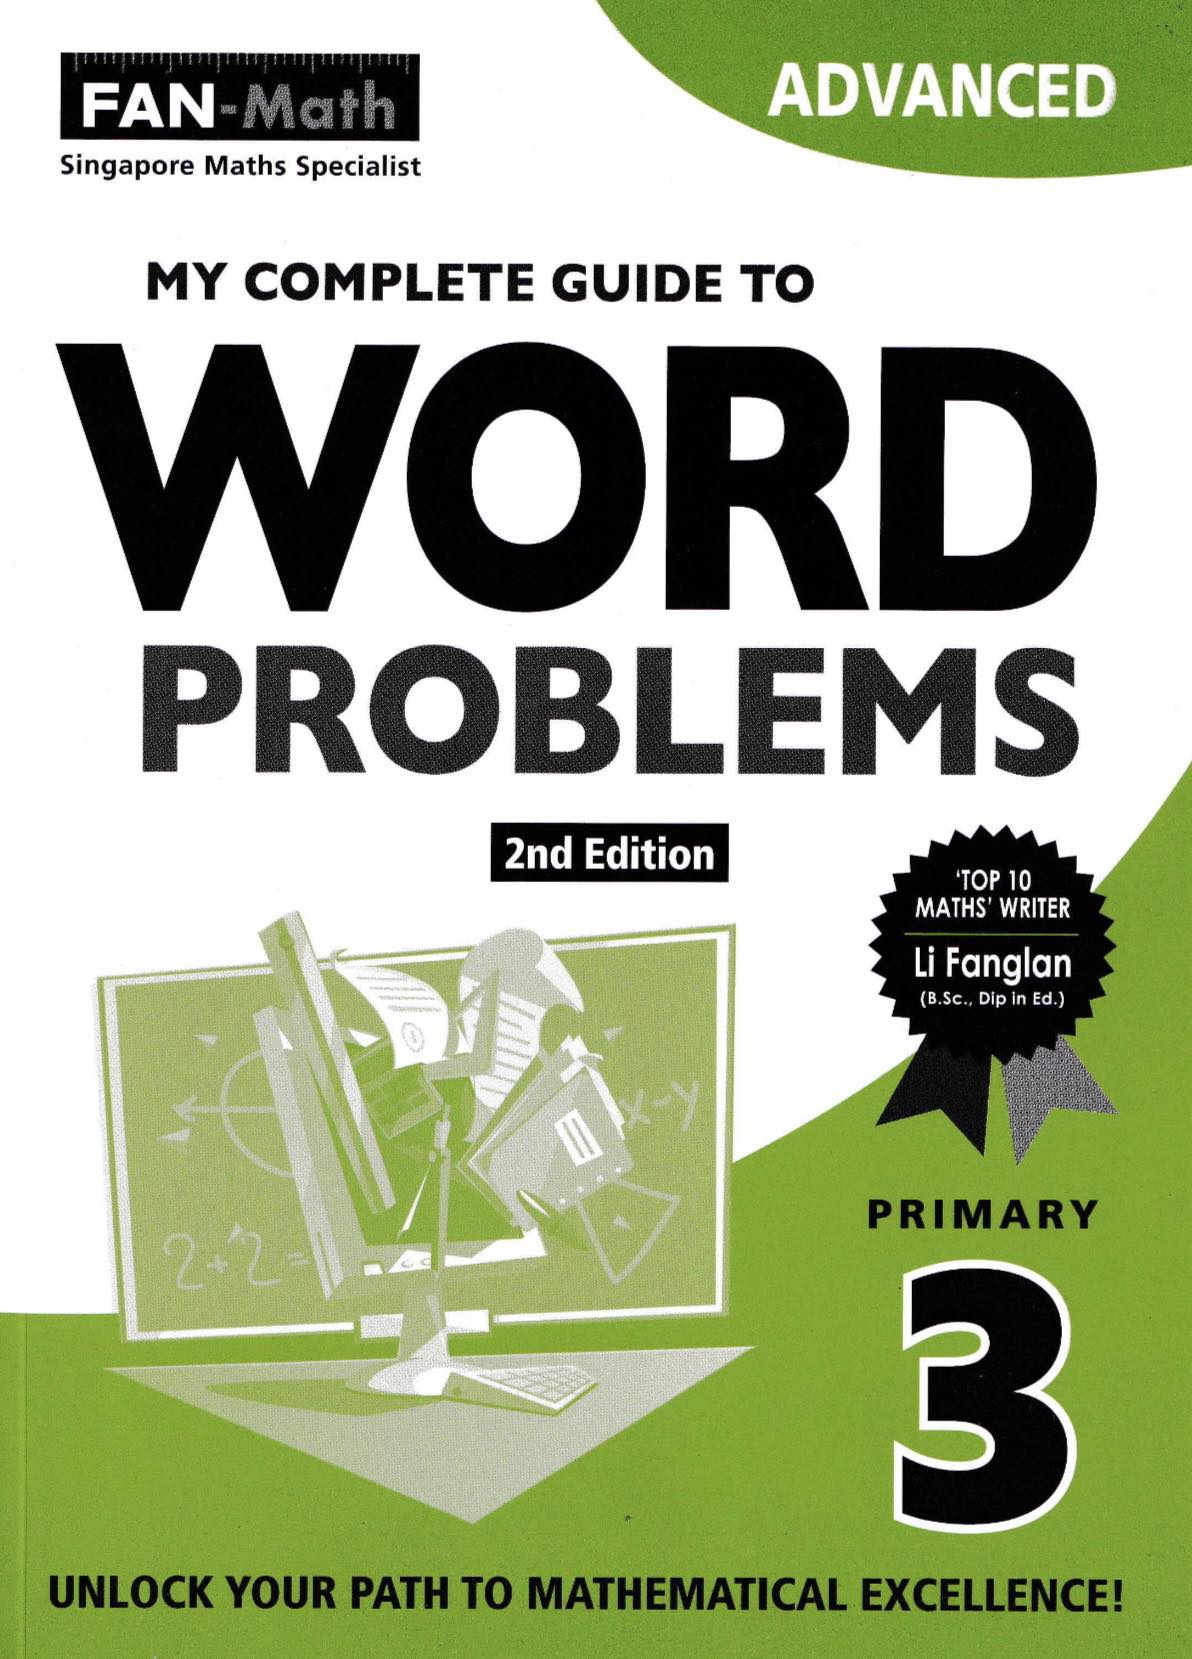 My Complete Guide to Word Problems (Advanced) for Primary Levels